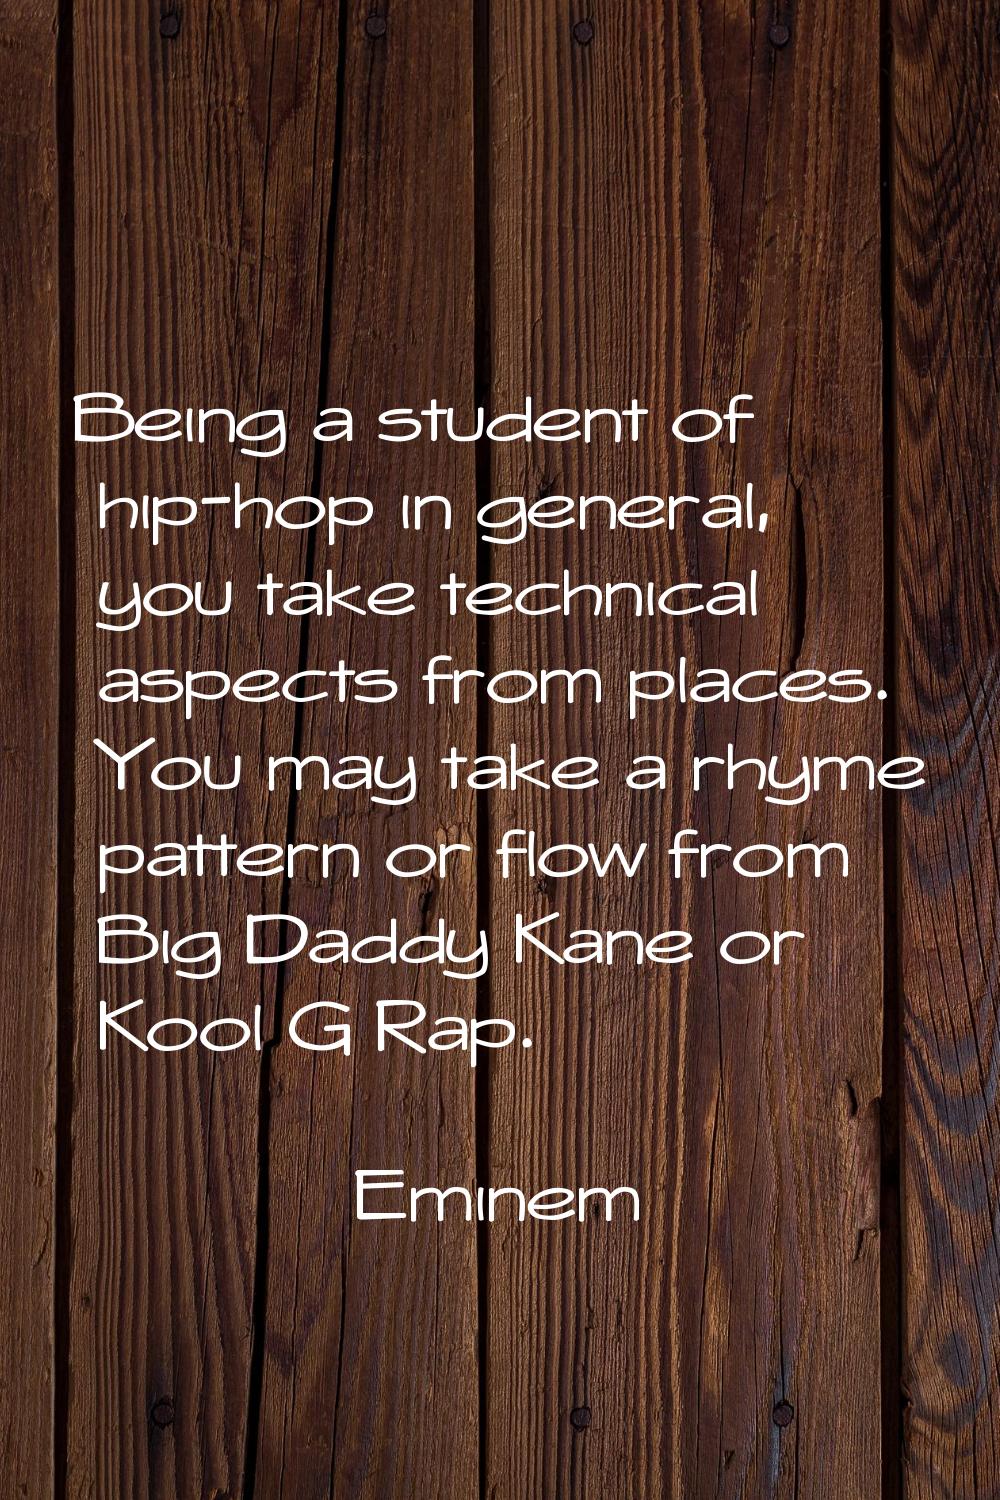 Being a student of hip-hop in general, you take technical aspects from places. You may take a rhyme